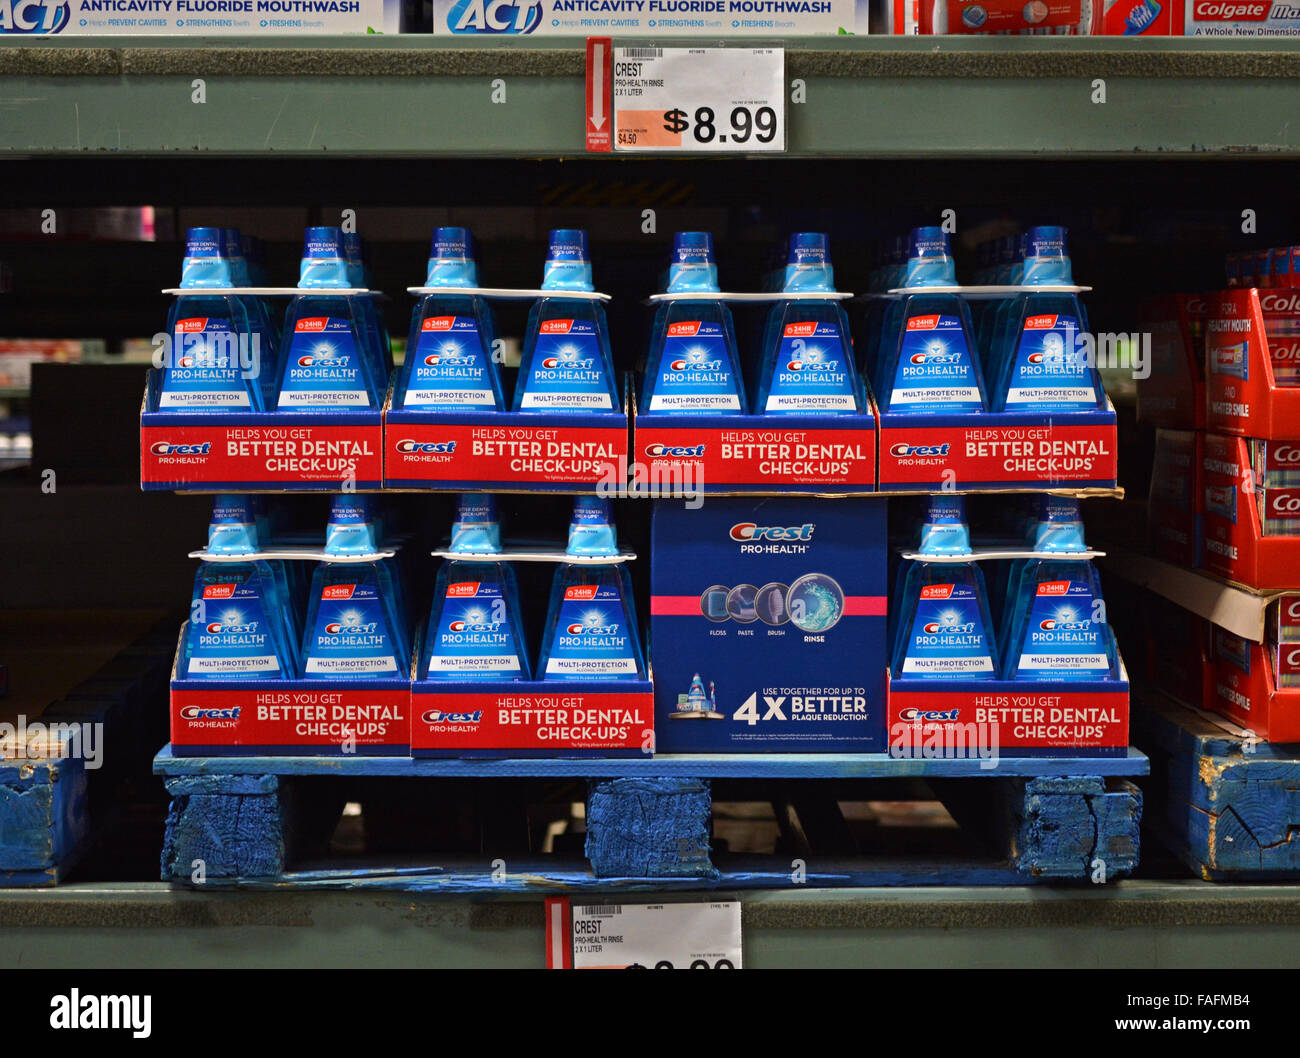 Large bottles of Crest Pro Health mouth wash for sale at BJ's Wholesale Club in Whitestone, Queens, New York. Stock Photo